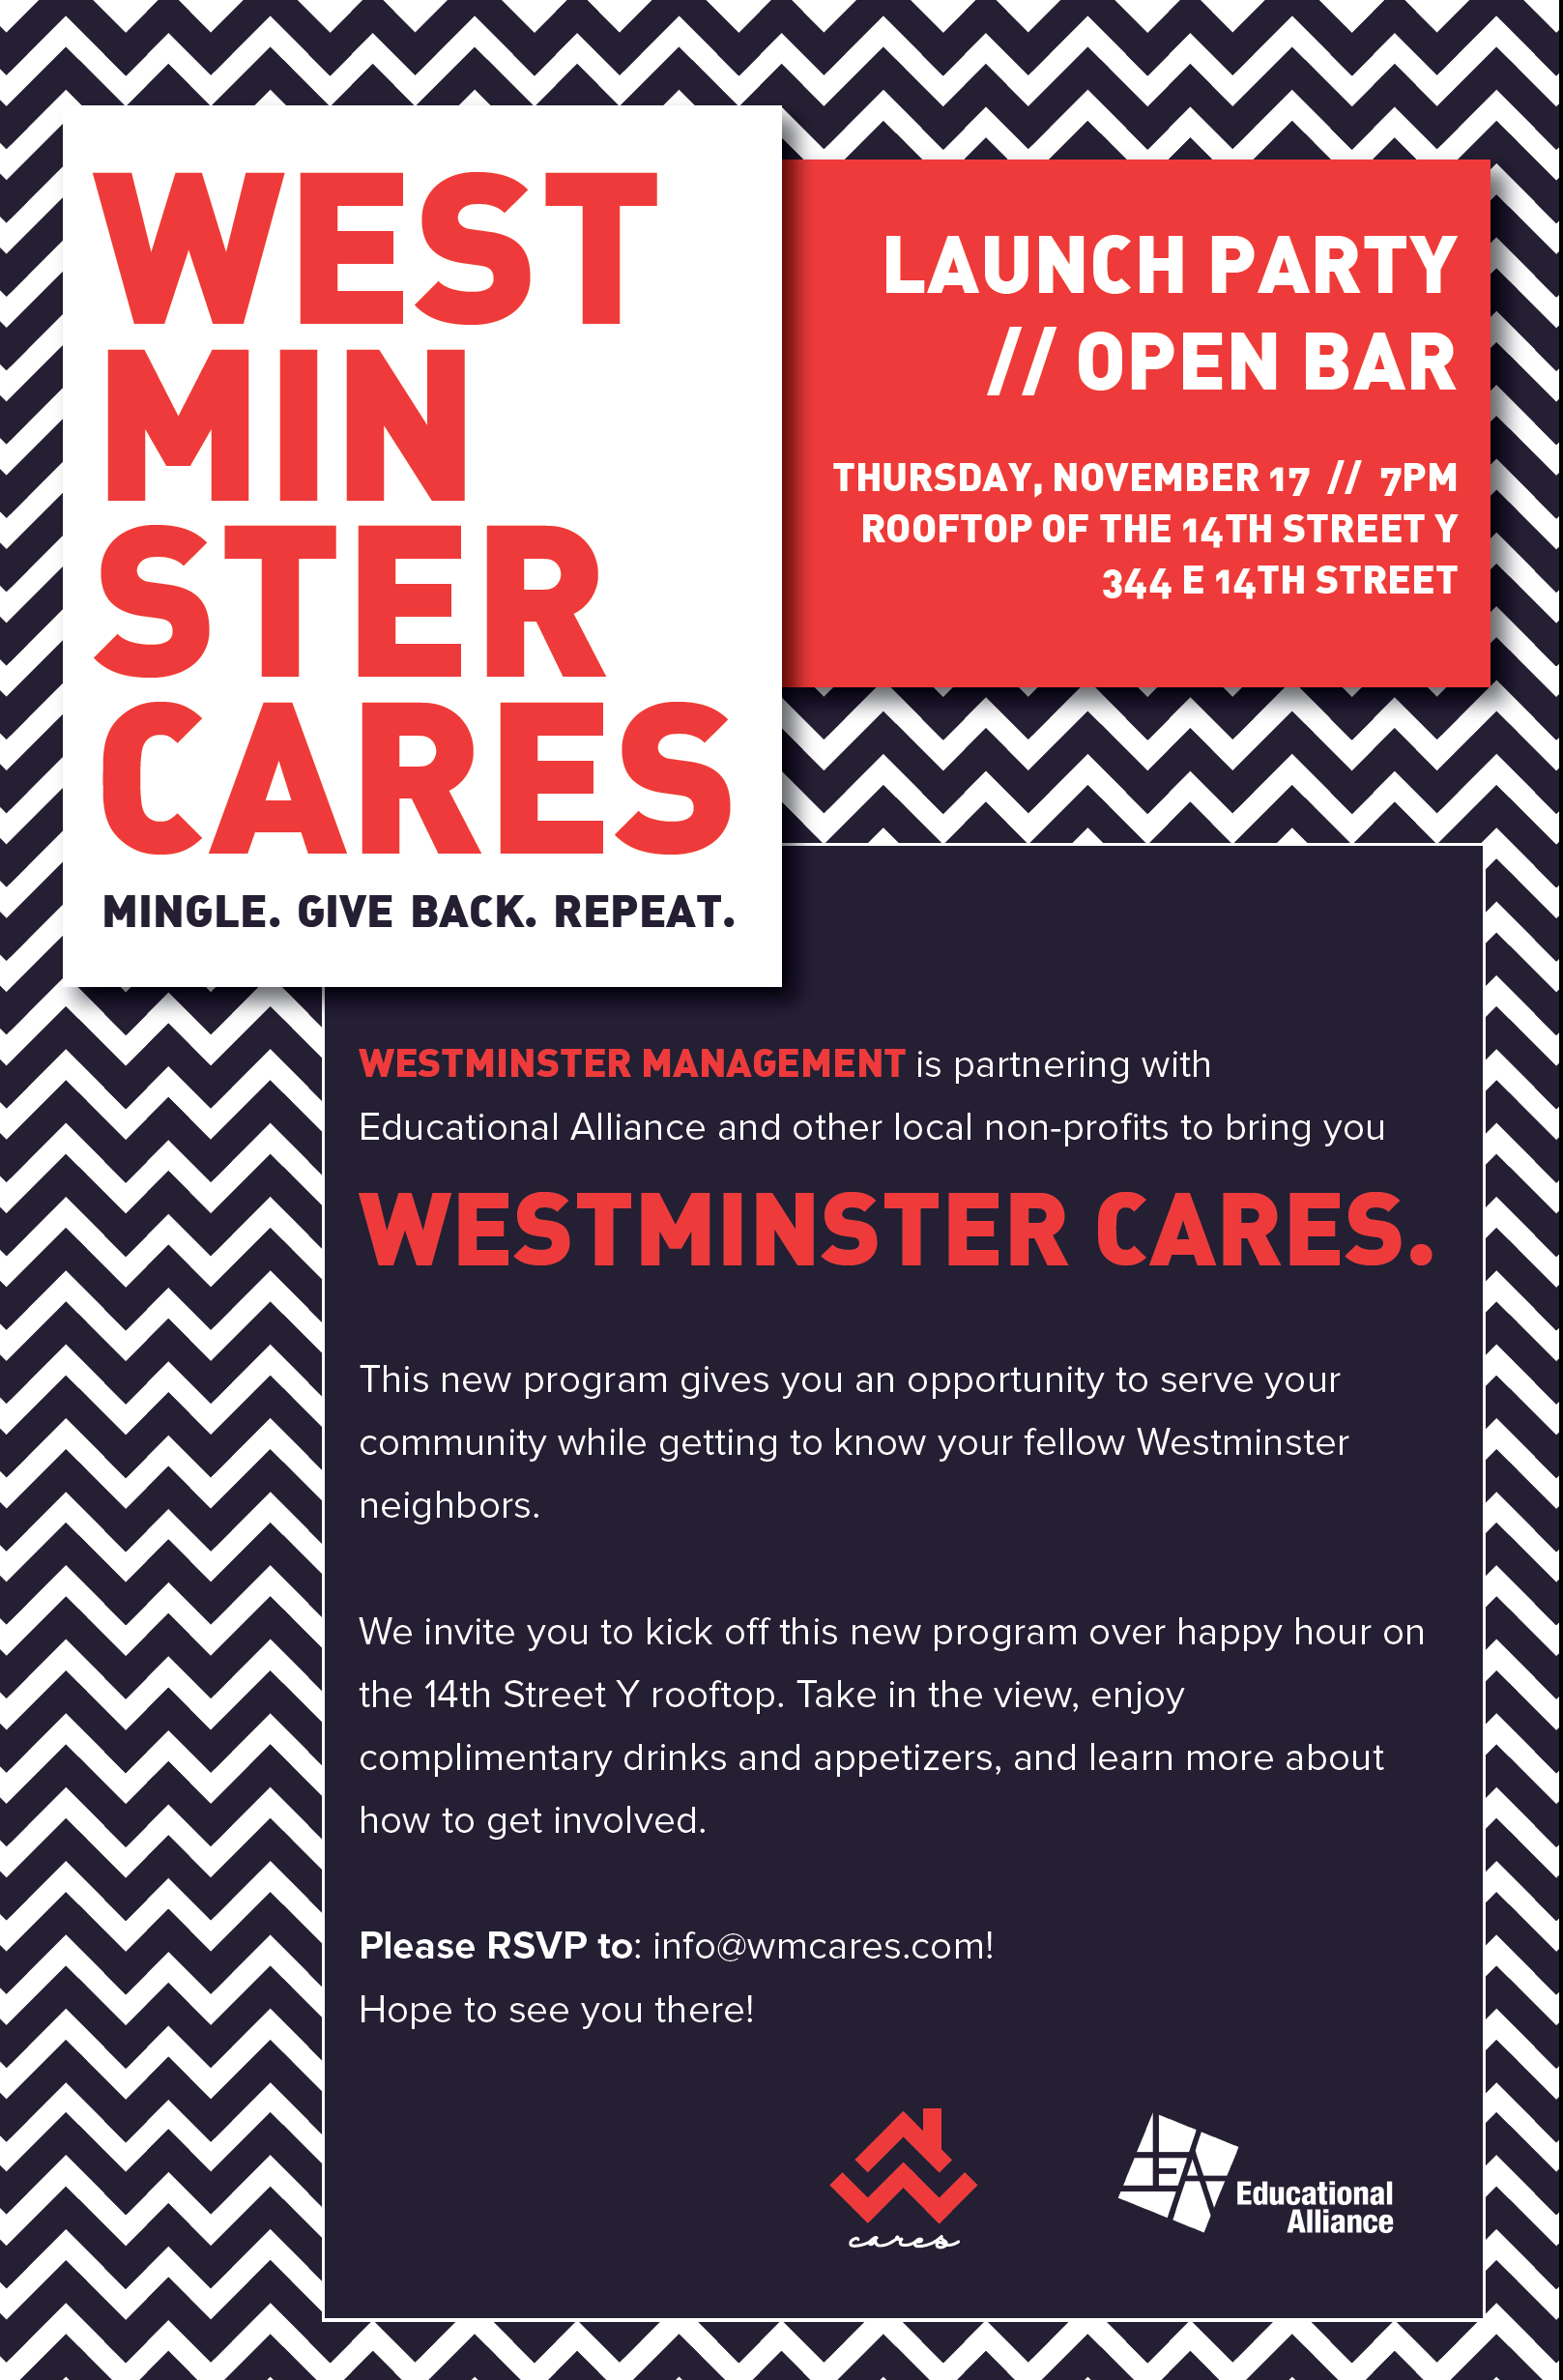 The invite flier for the kickoff event for Westminster Cares.